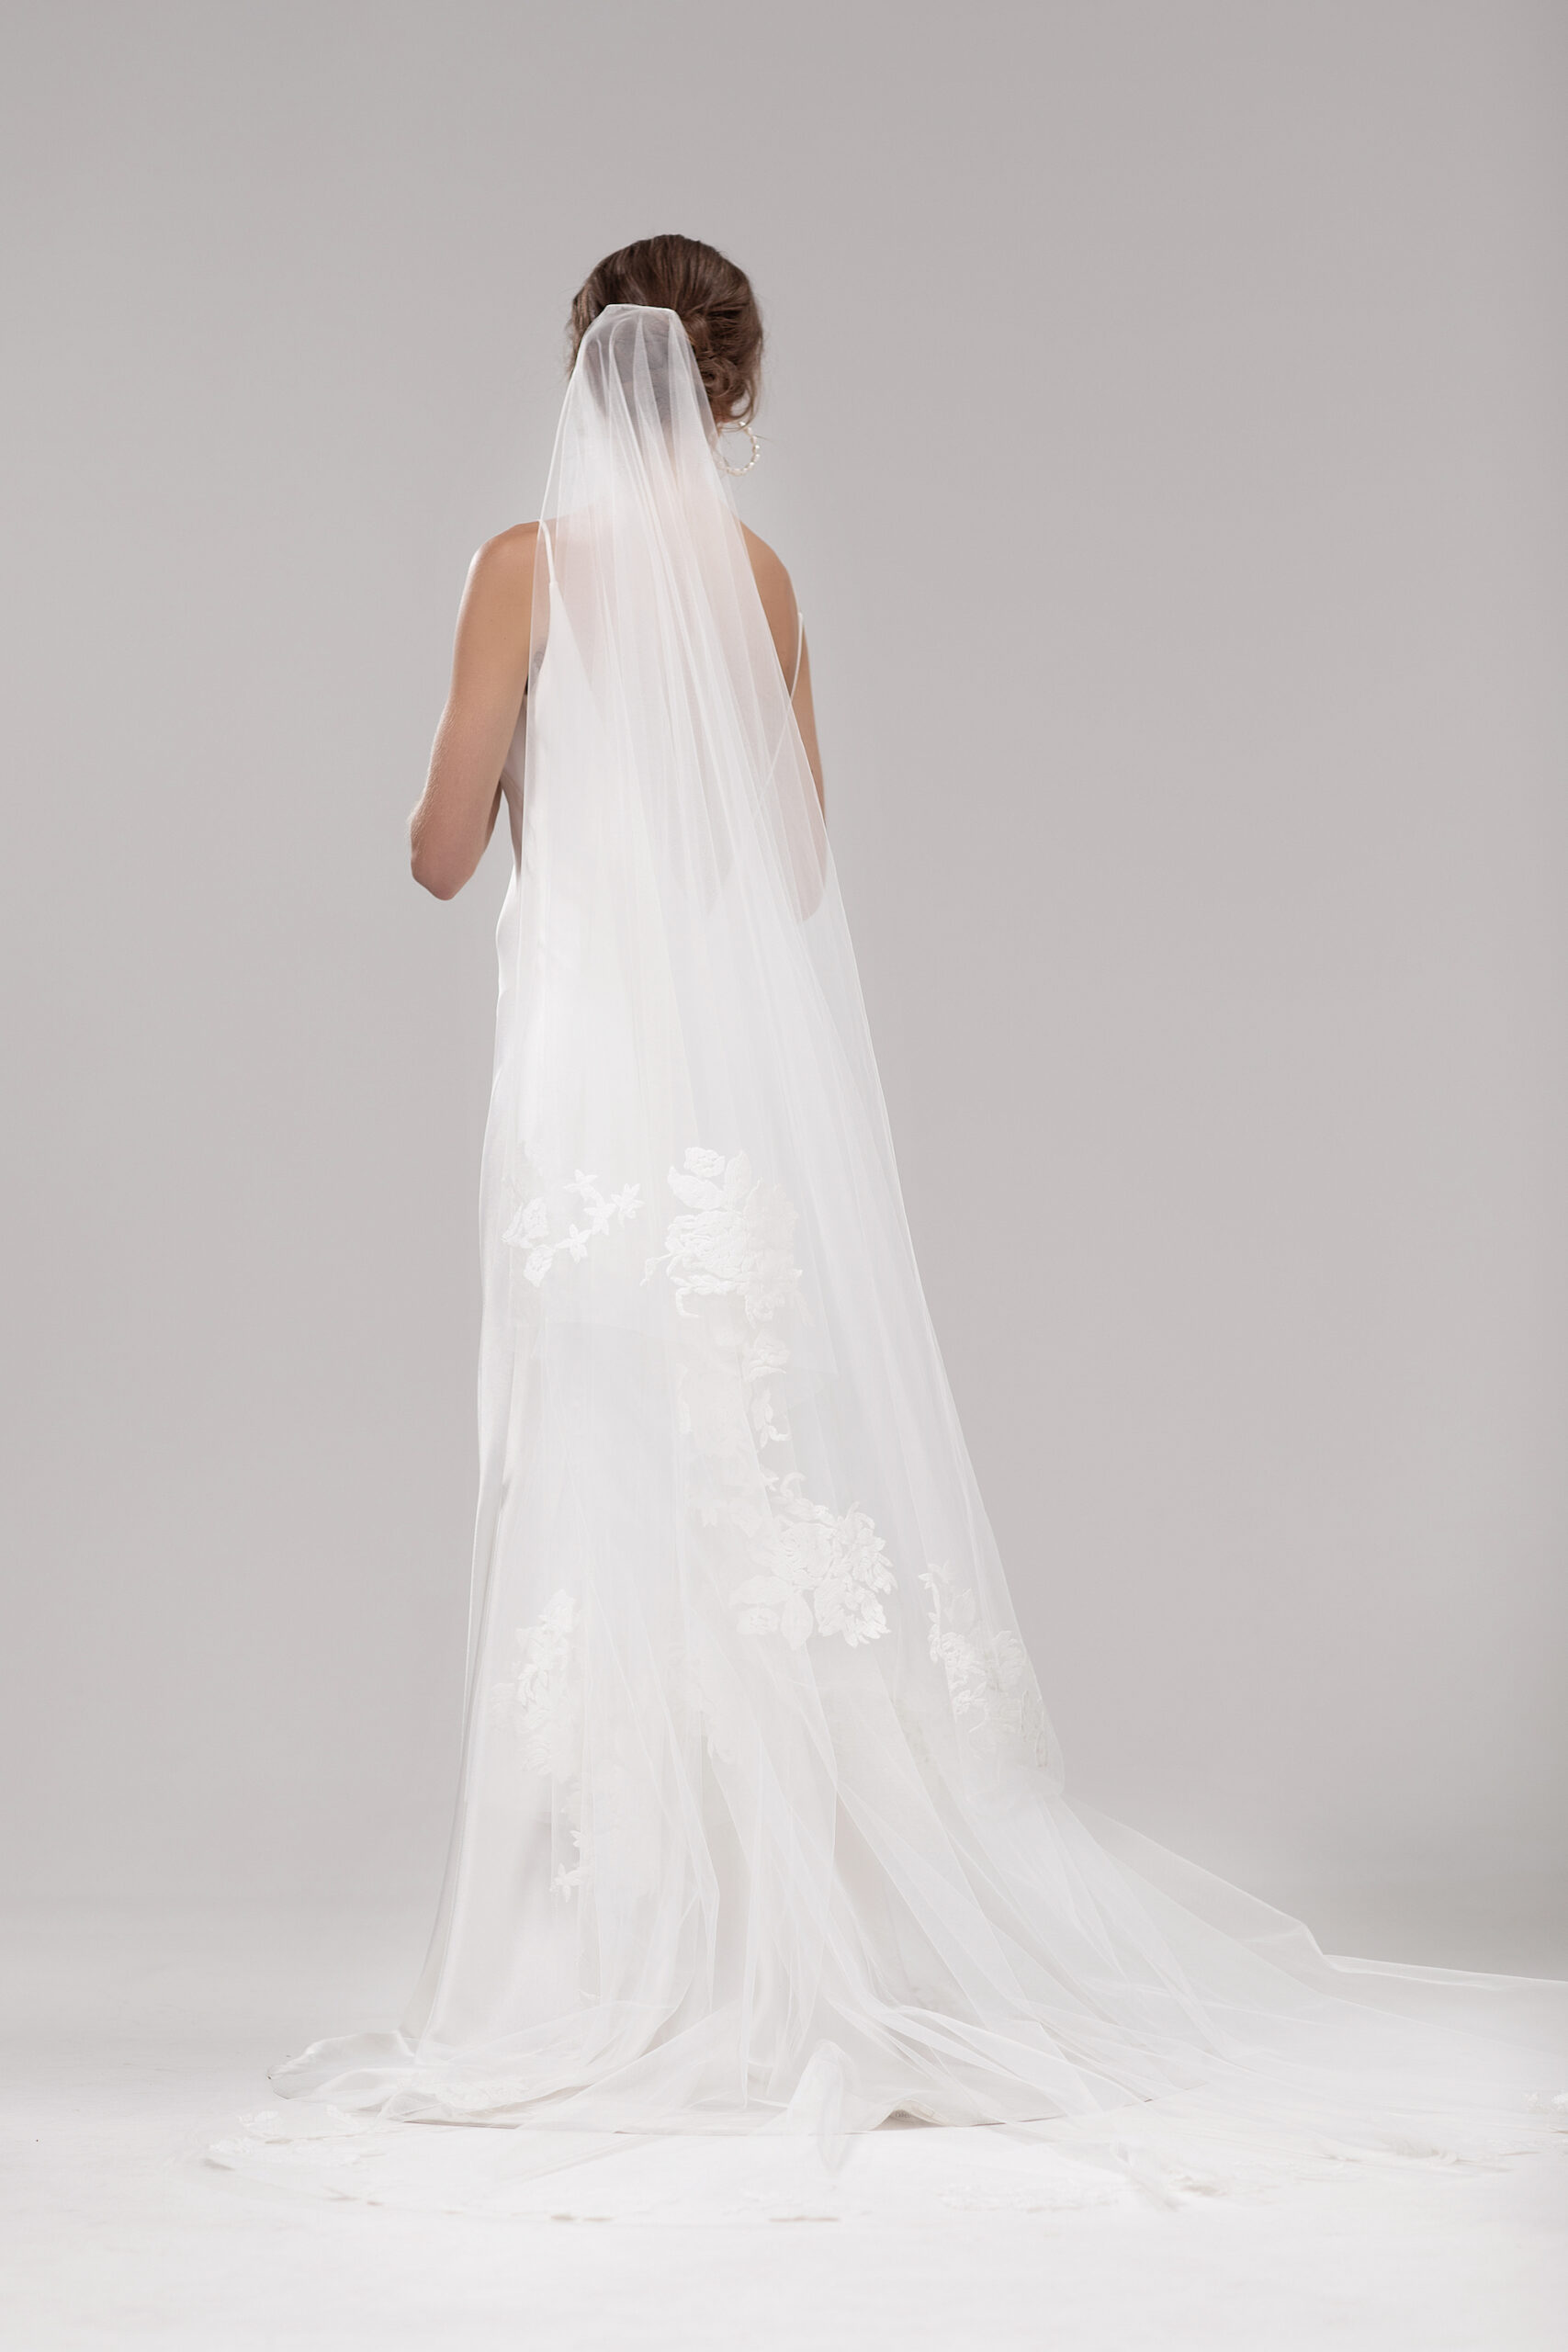 Back view of model wearing the Mayfair veil, a two-tier 2.5m veil with delicate floral embroidery around the edge.